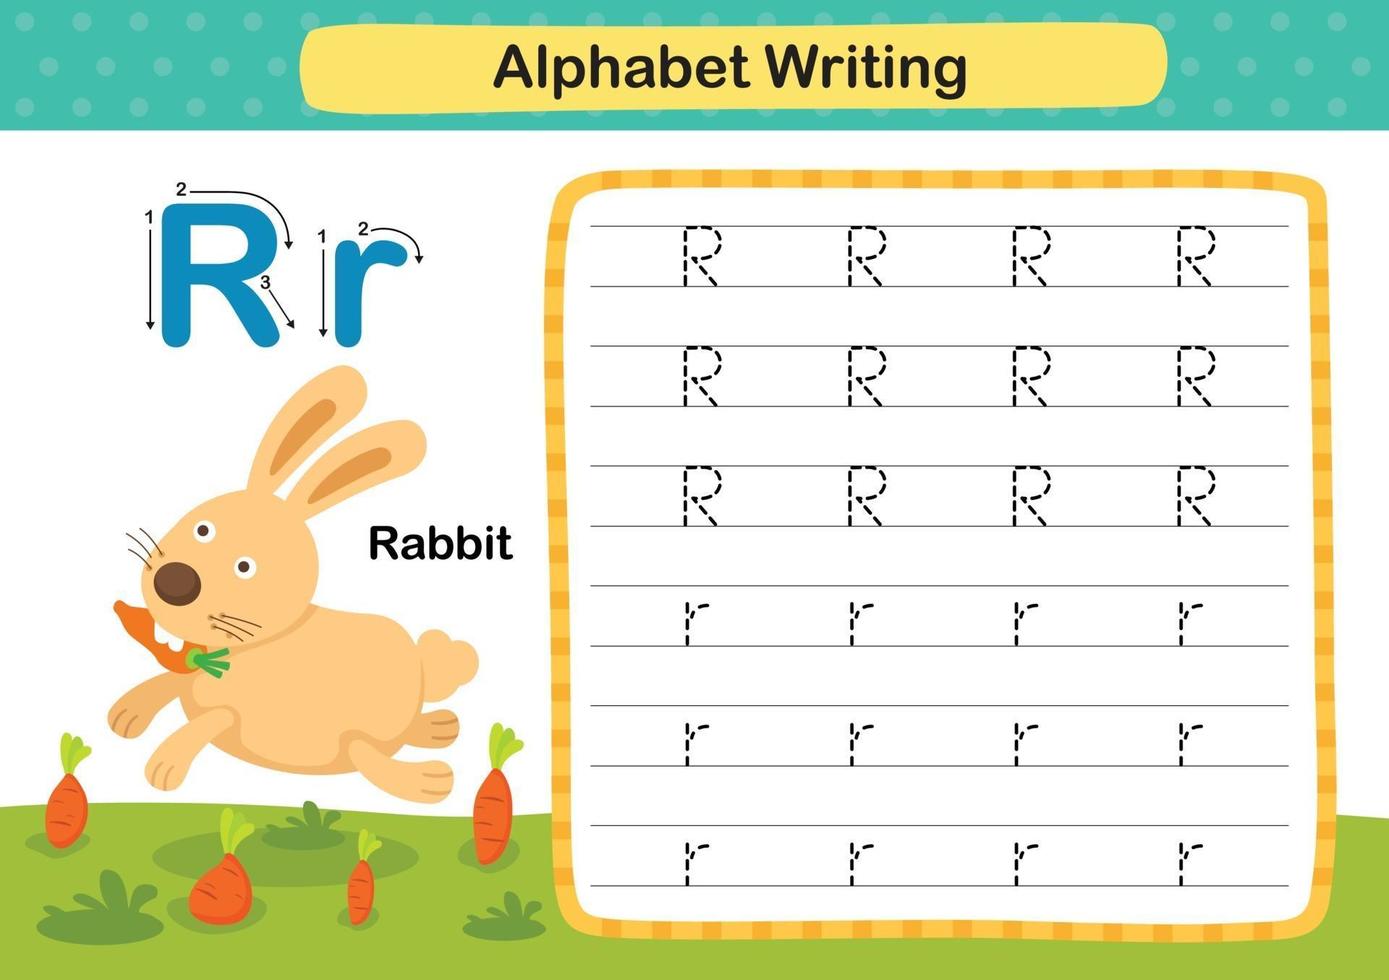 Alphabet Letter R-Rabbit exercise with cartoon vocabulary illustration, vector